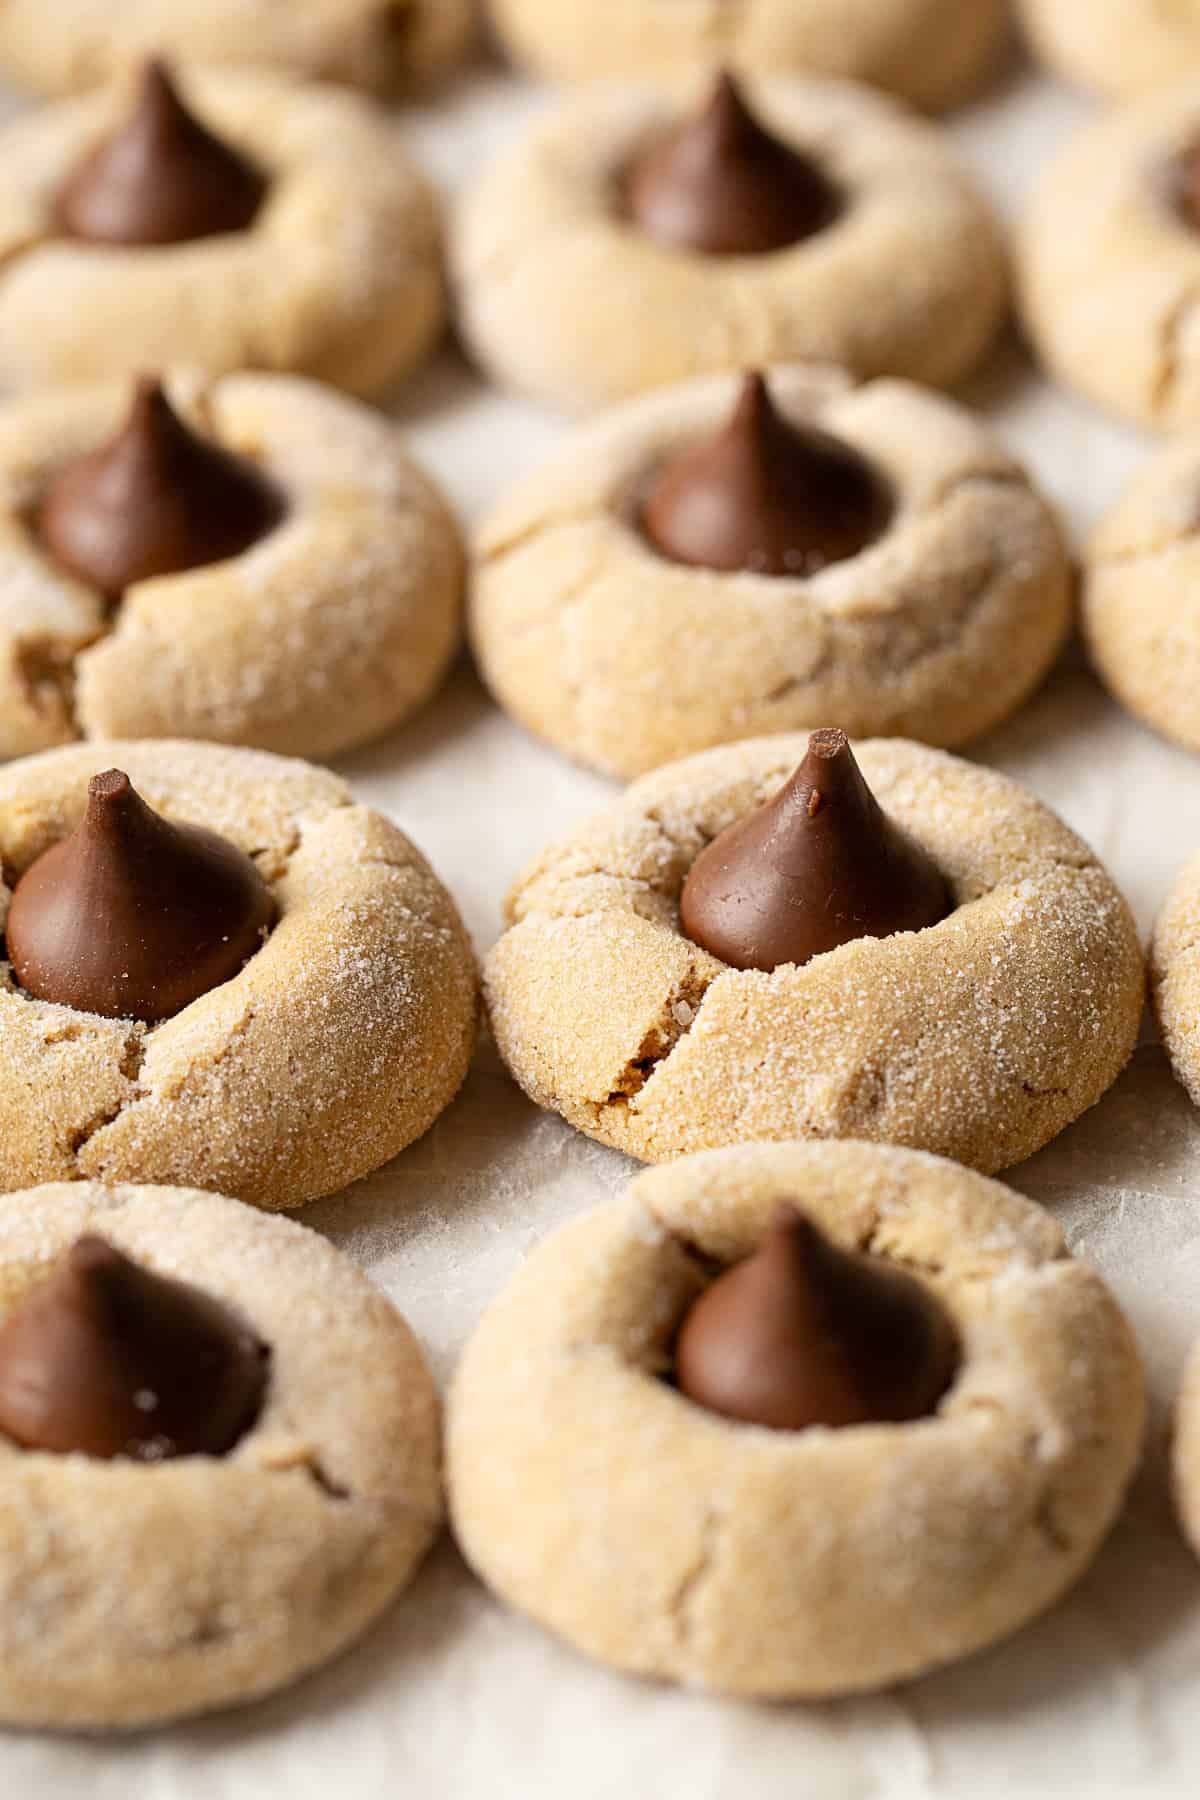 Gluten-free peanut butter blossom cookies cooling.